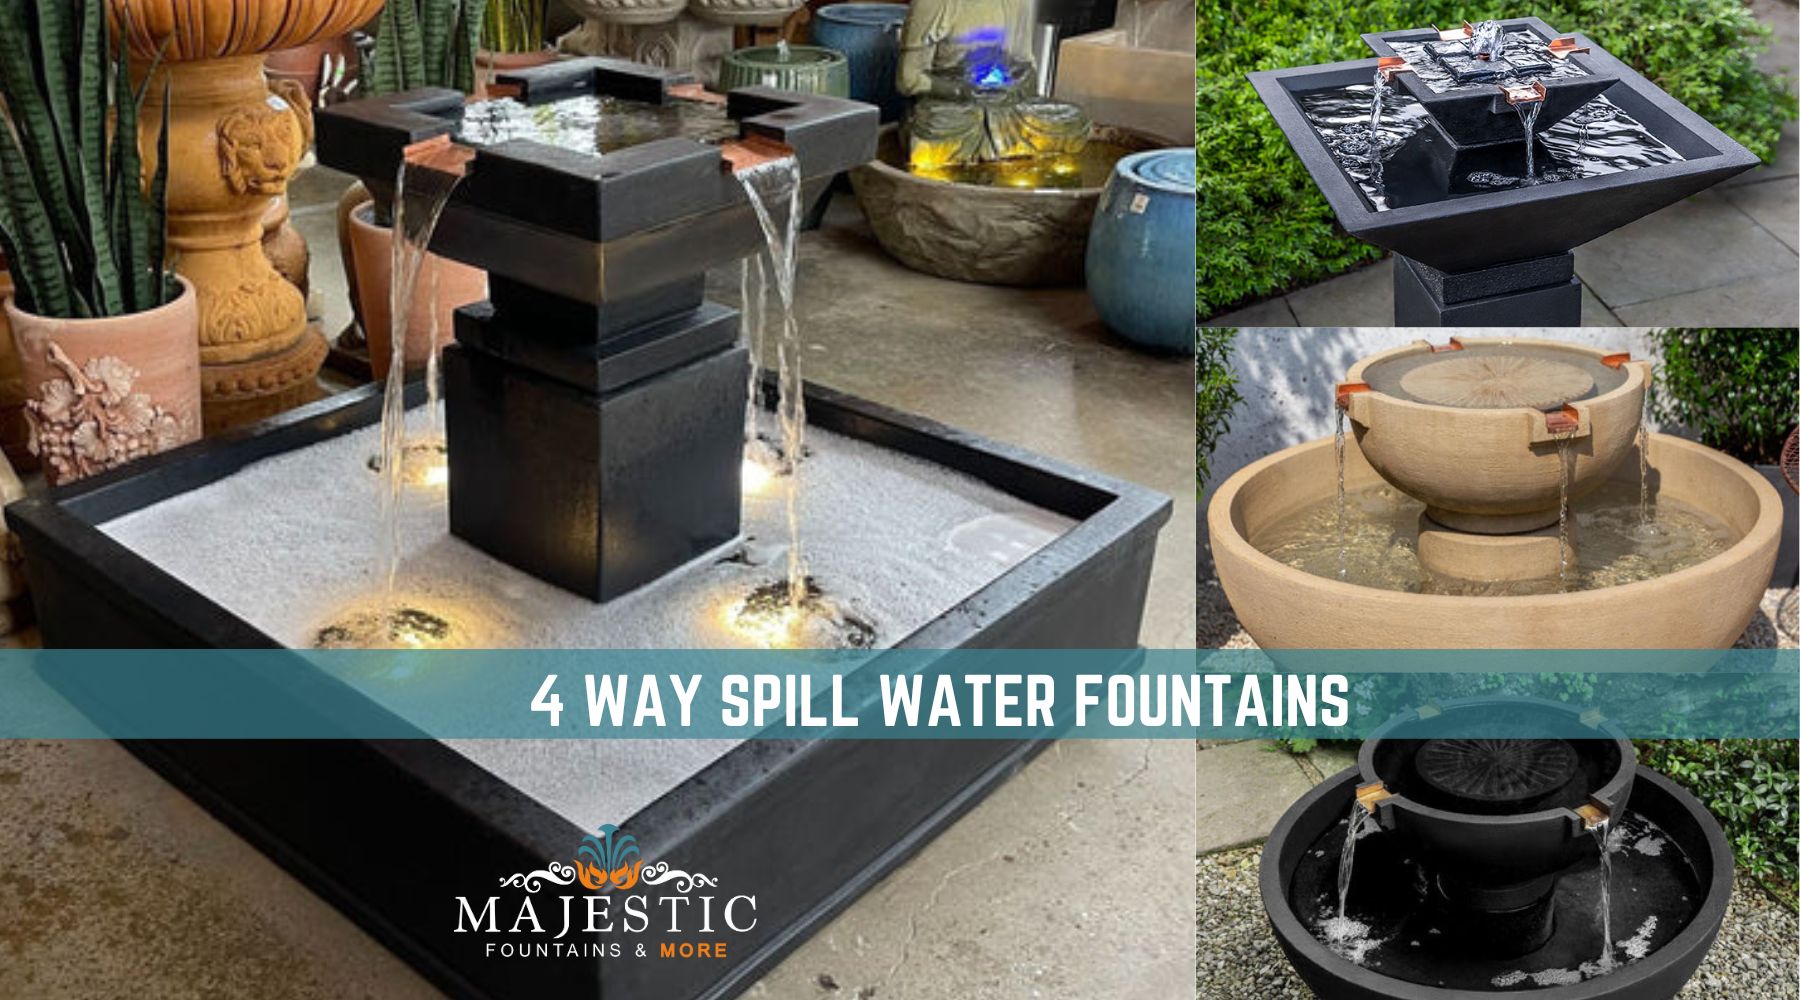 The Most Amazing 4 Way Spill Water Fountains for your garden